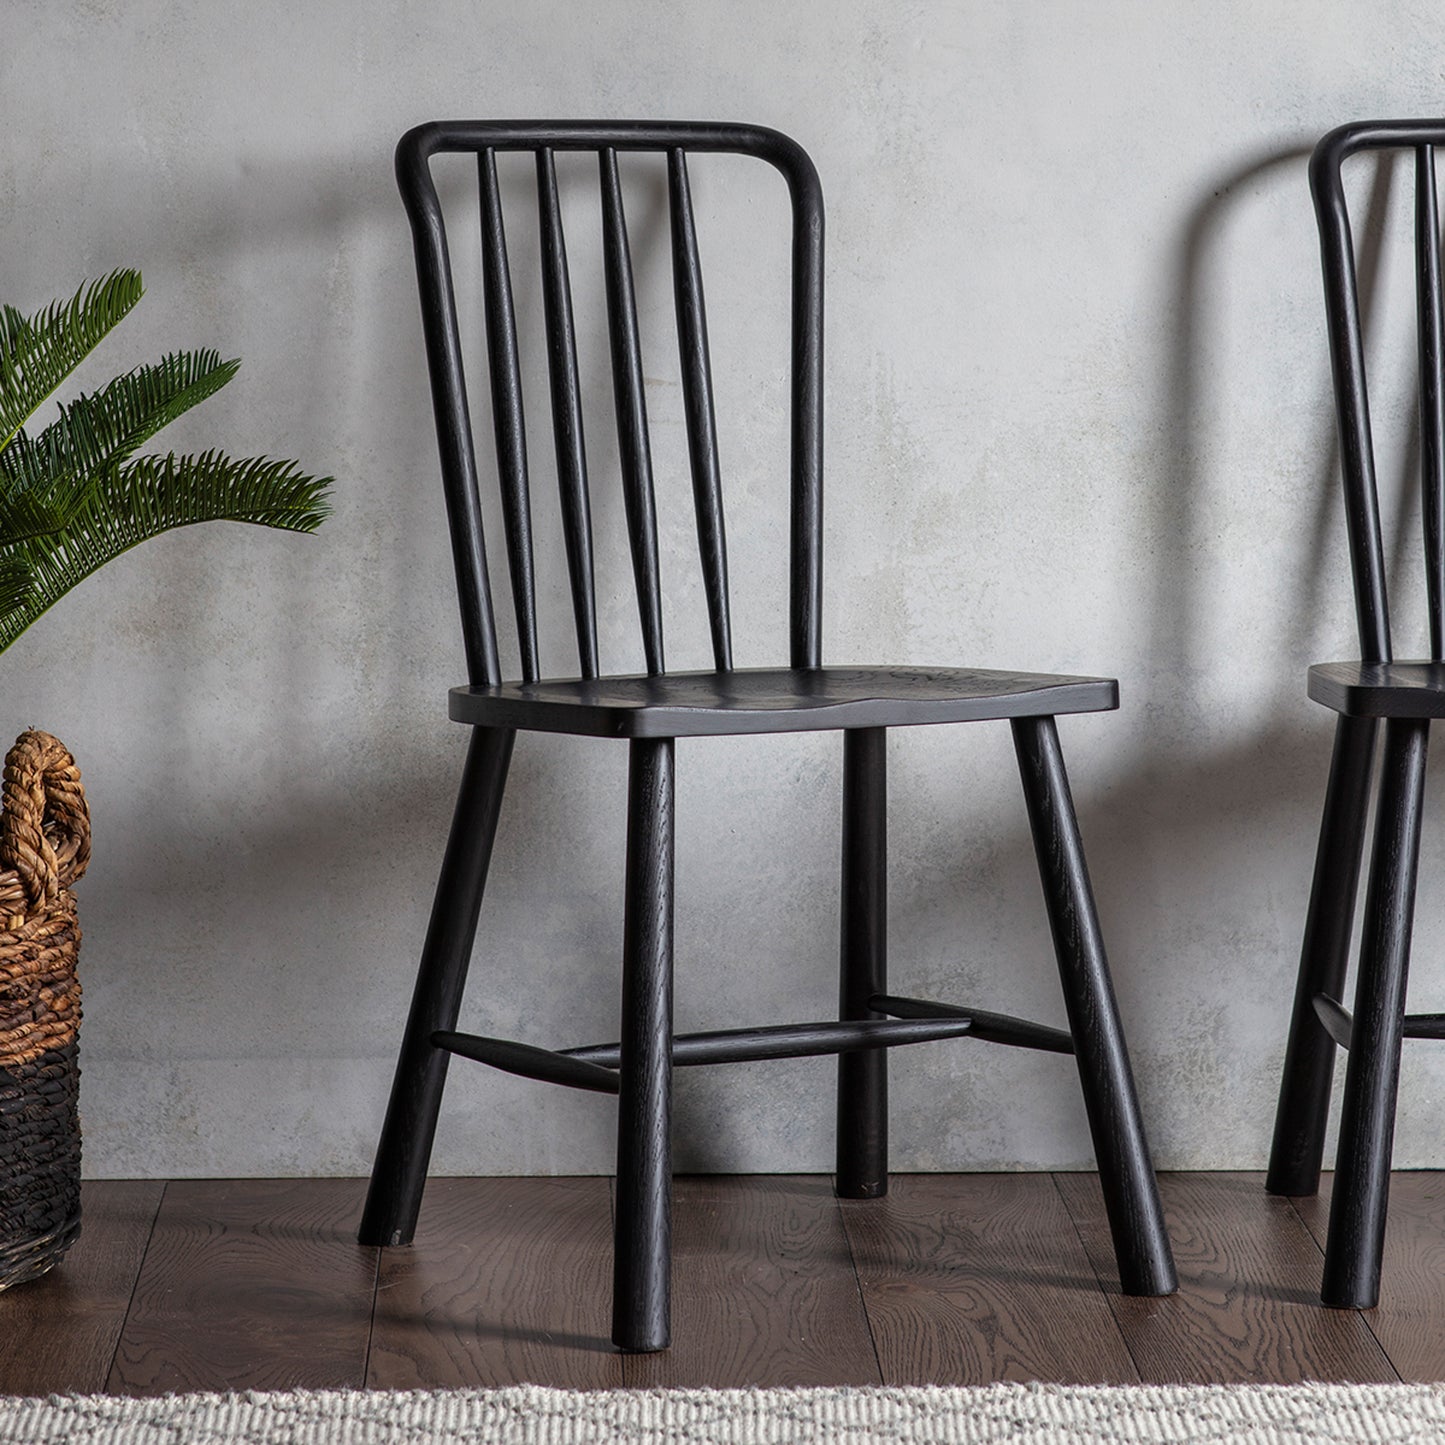 Two Tigley Dining Chairs Black 450x455x920mm (2pk) from Kikiathome.co.uk enhancing interior decor next to a potted plant.